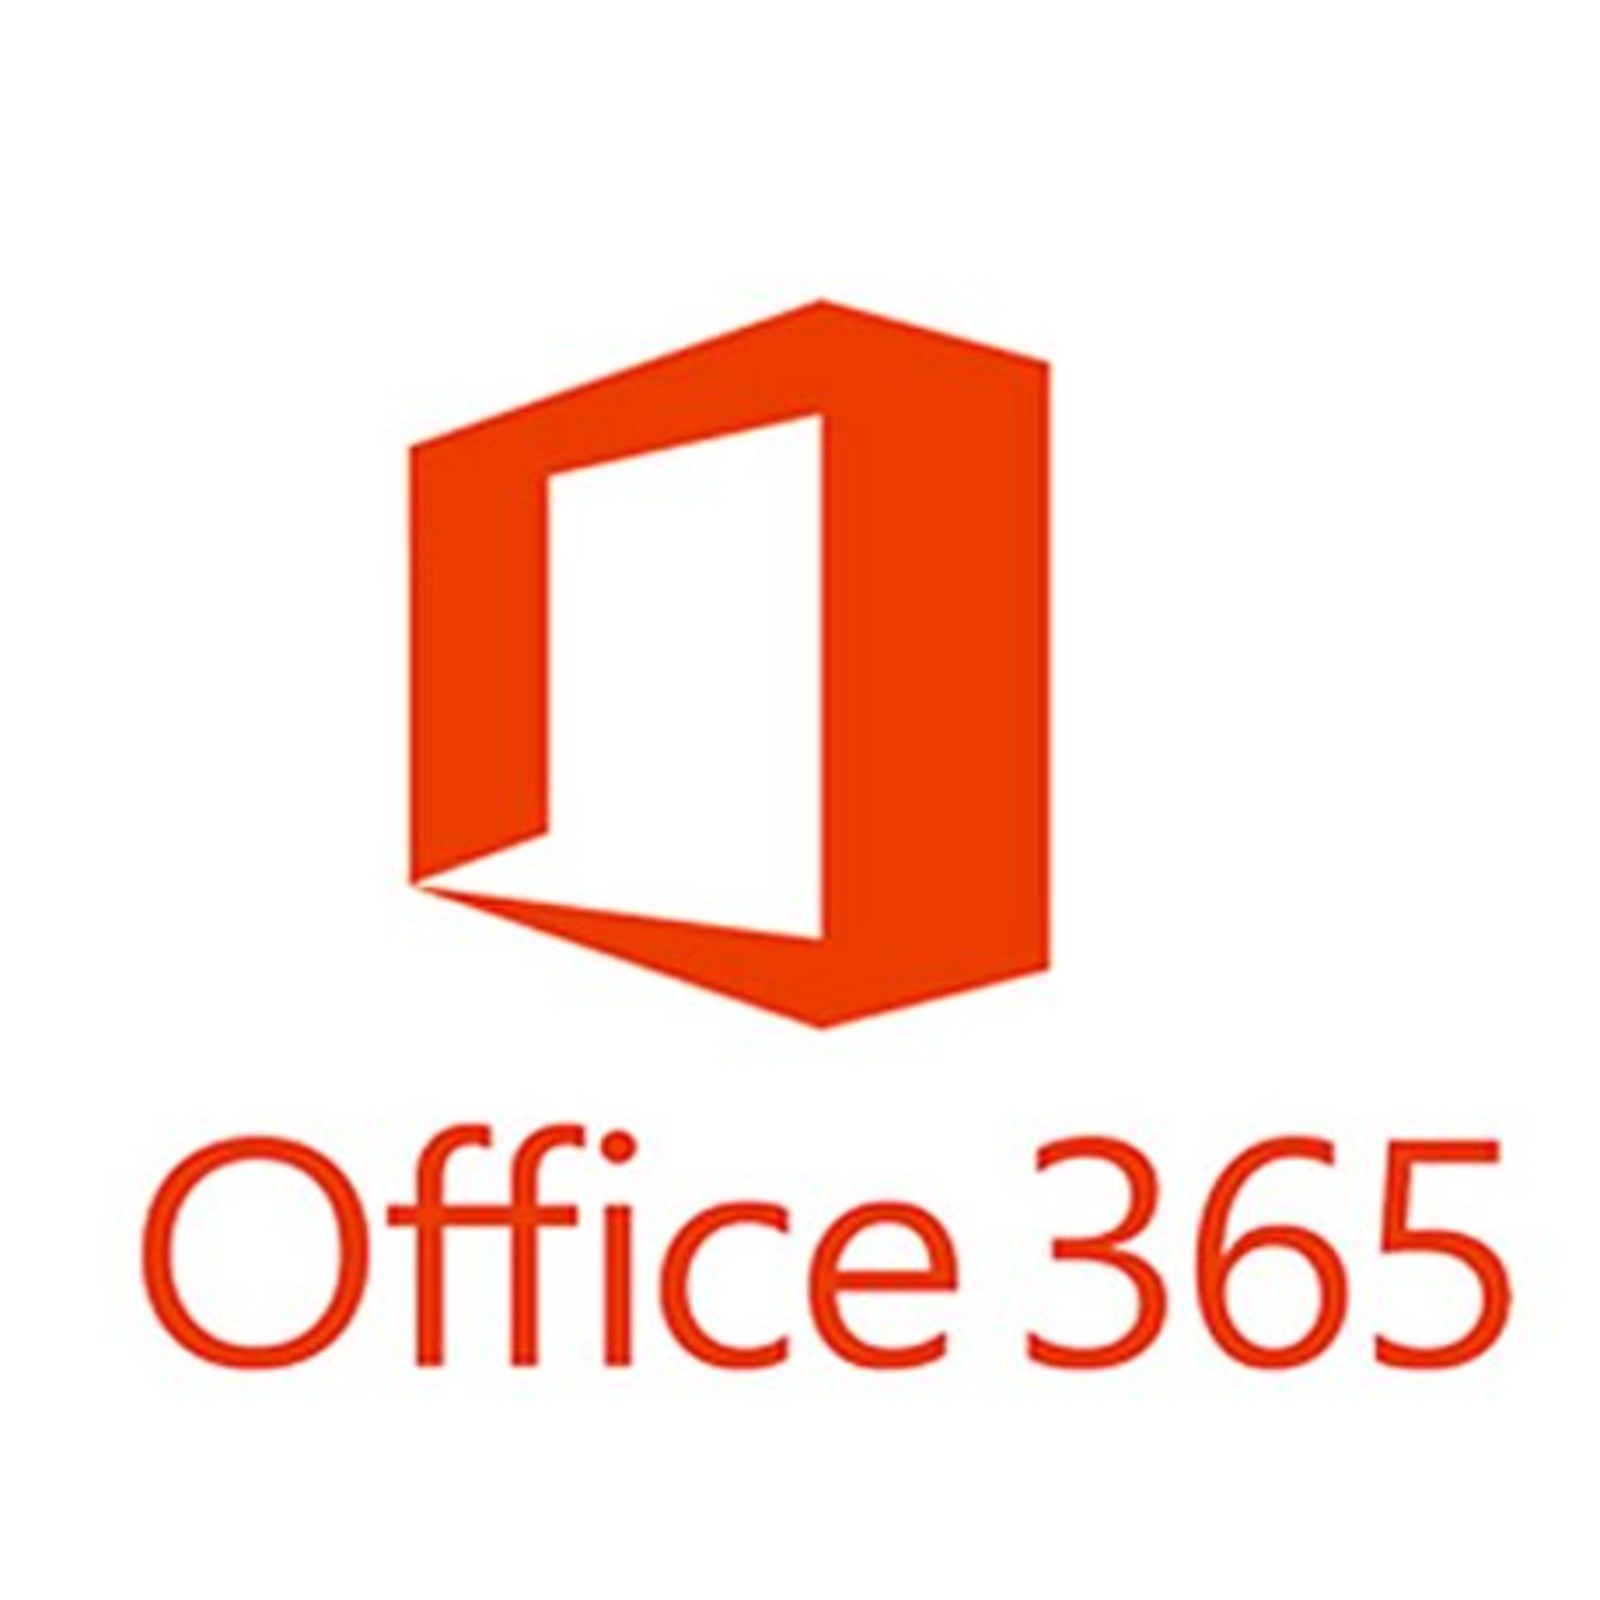 Microsoft Office 365 Office 365 Incompany Course